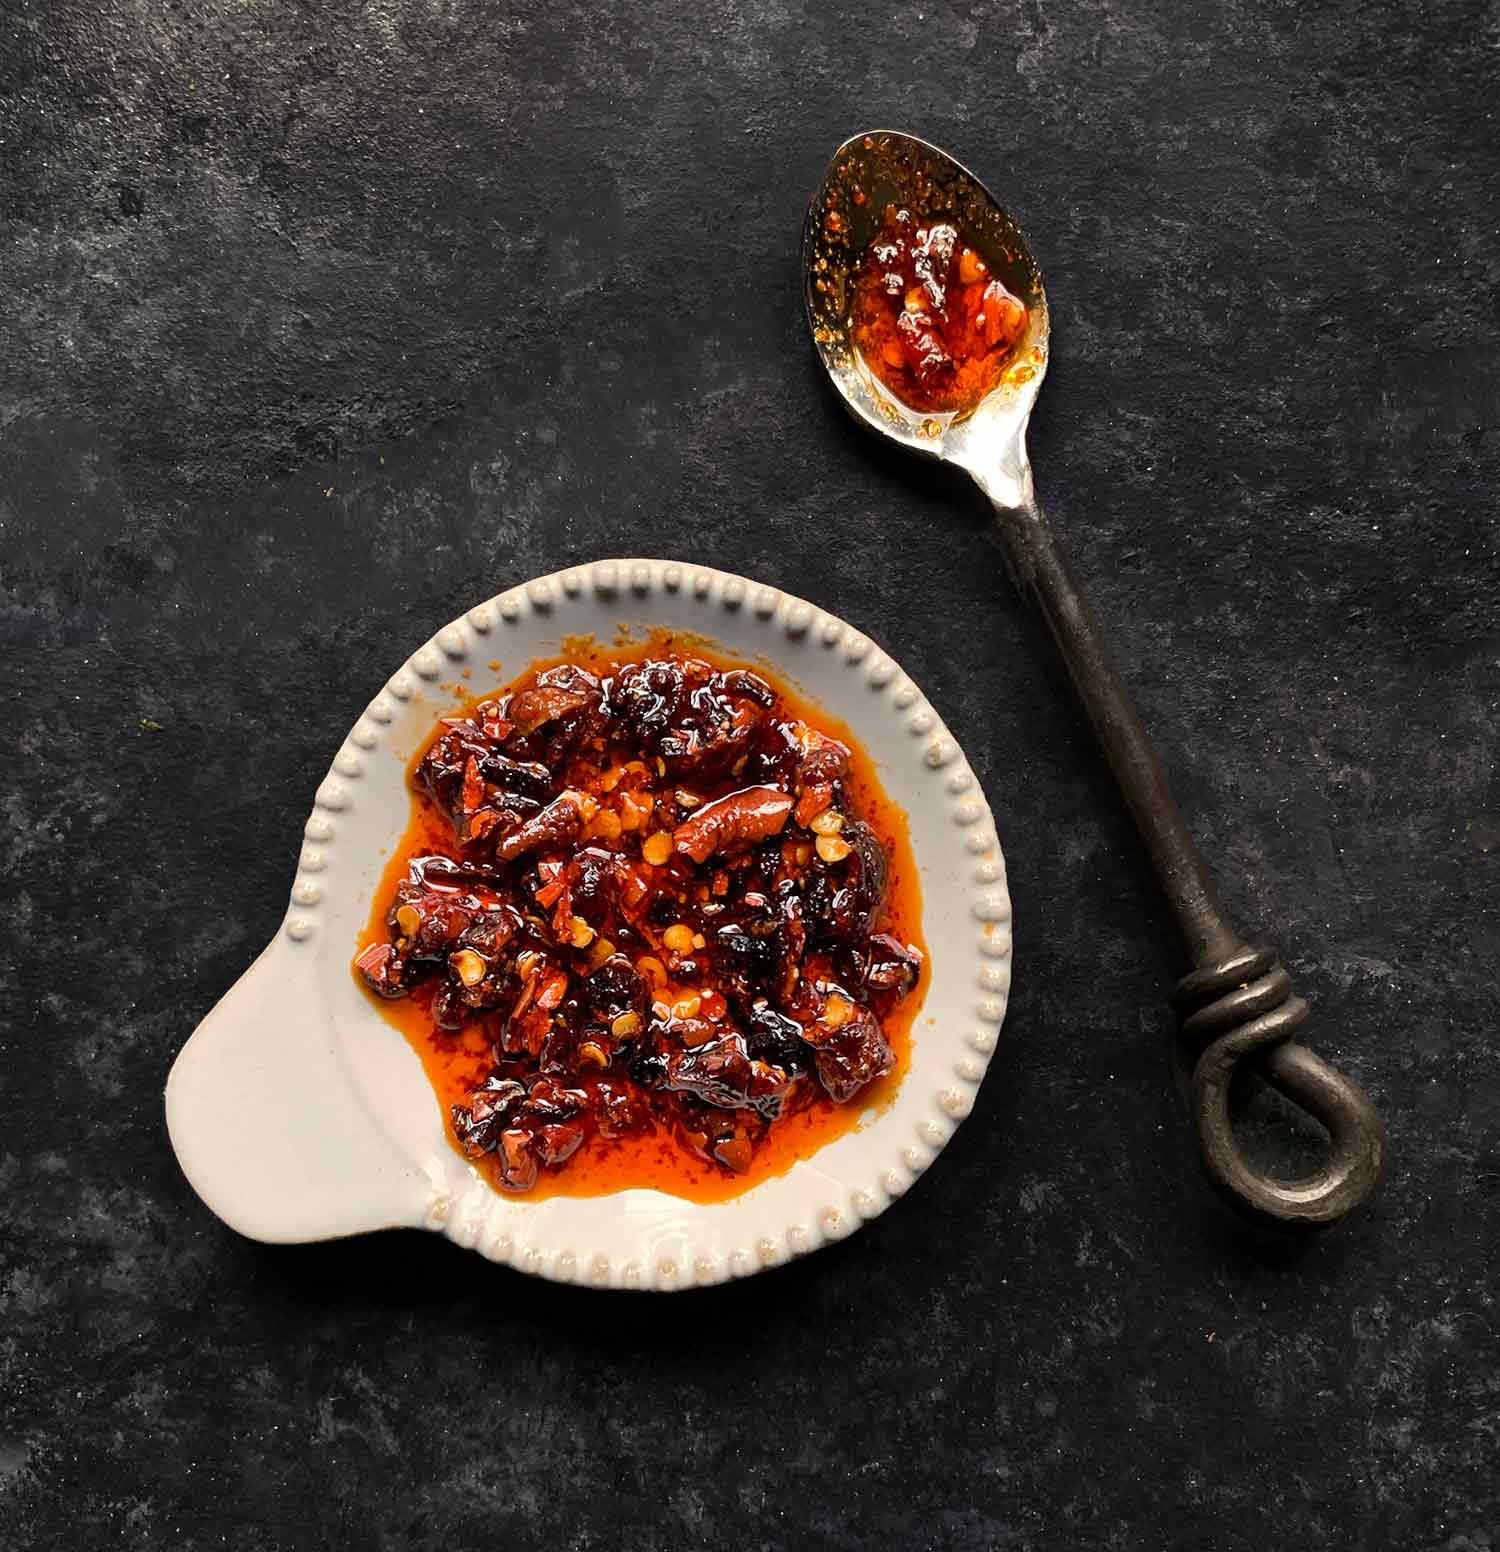 Chili crisp on a small plate with a spoon.